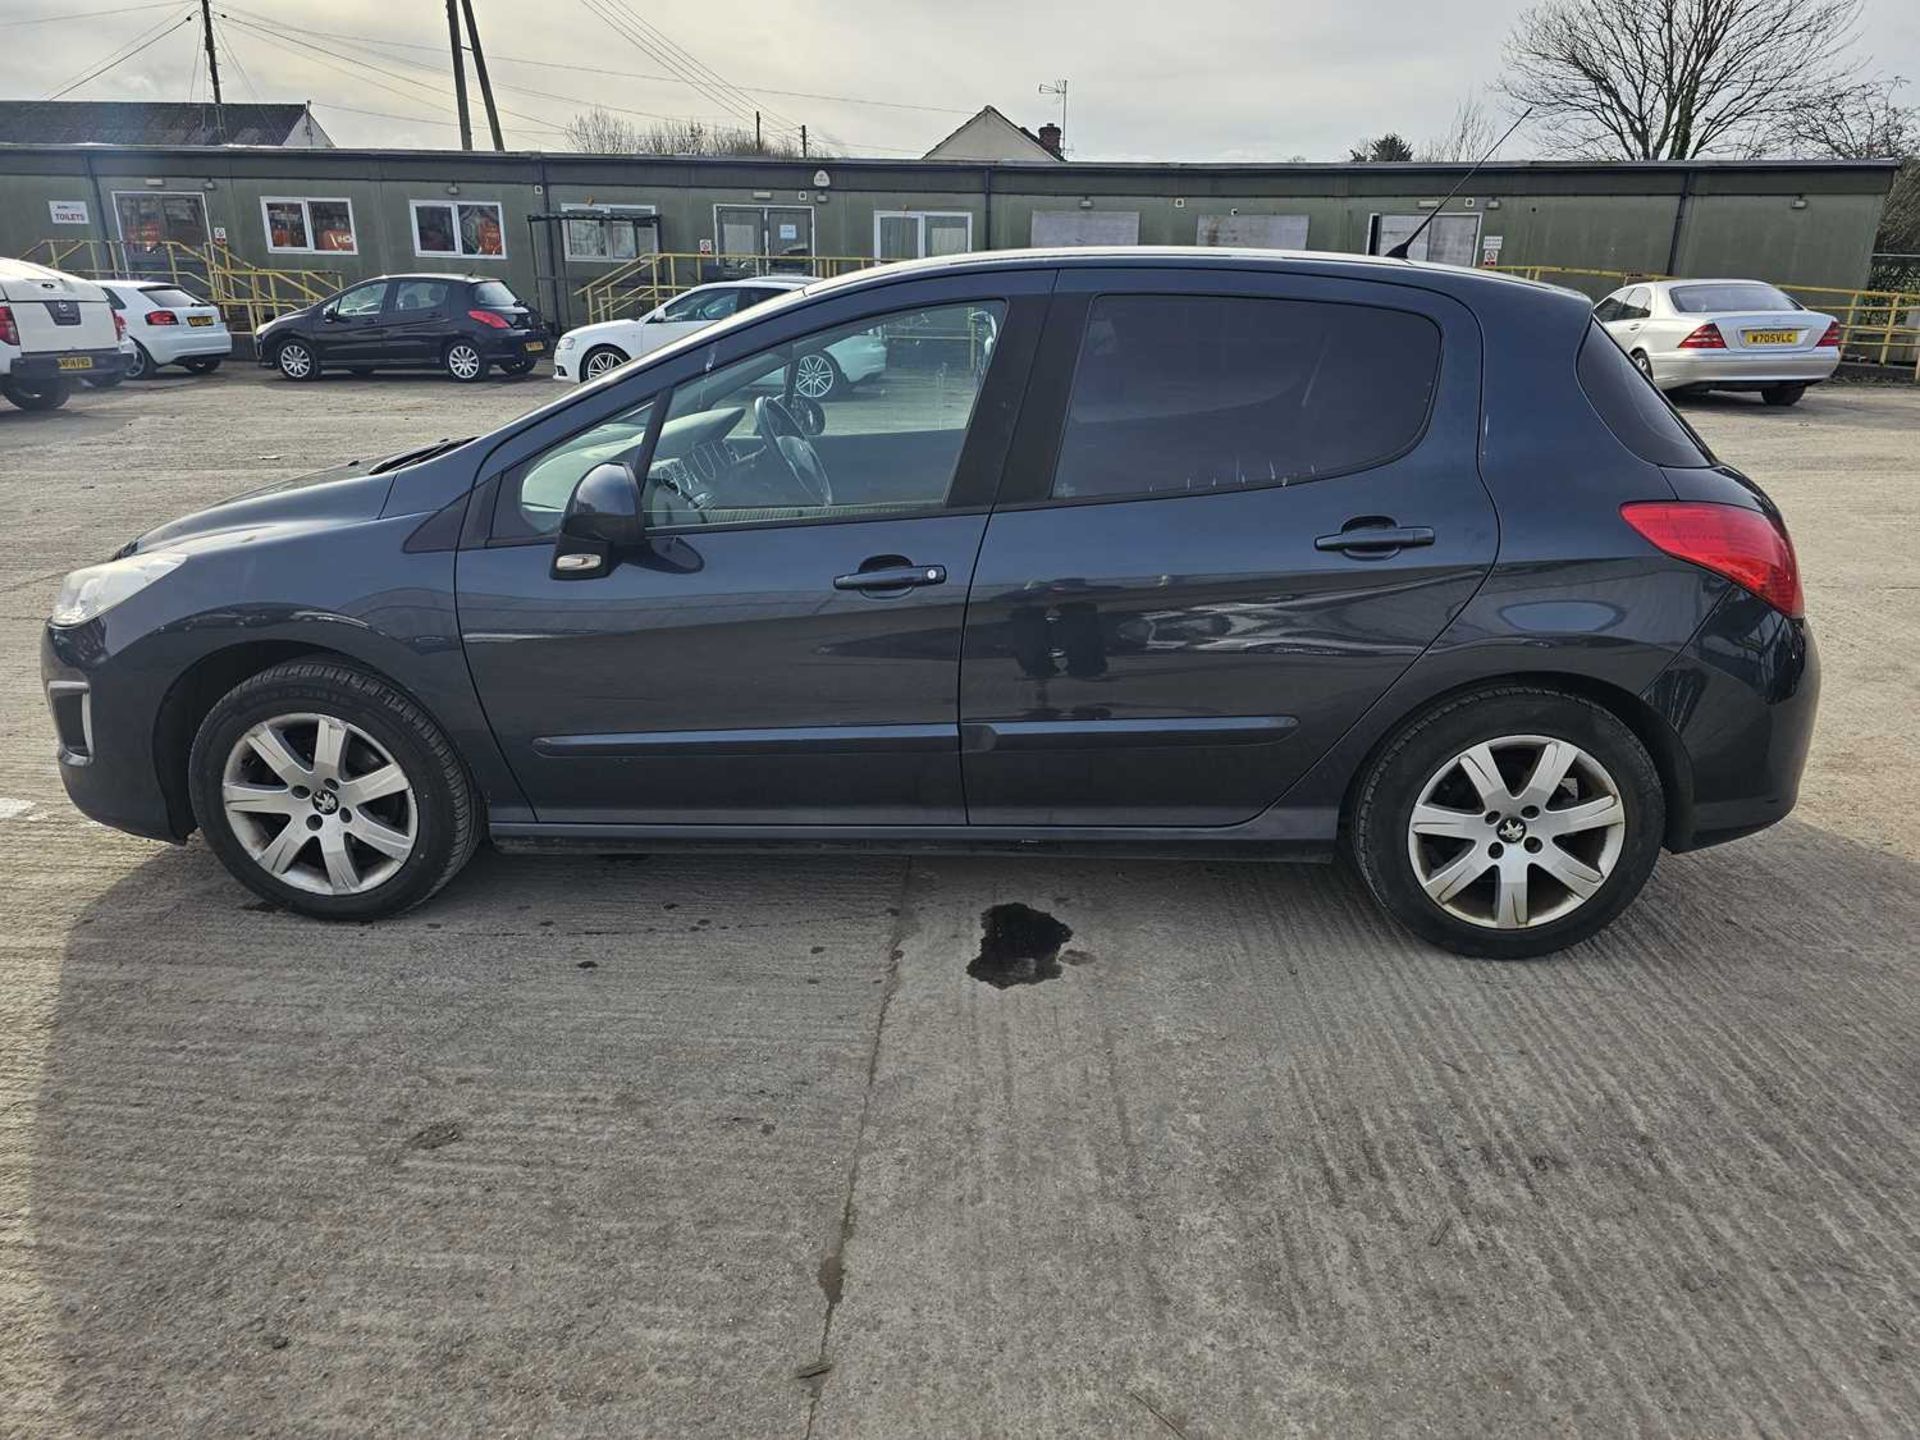 2012 Peugeot 308, 5 Speed, Bluetooth, Cruise Control, A/C (Reg. Docs. Available, Tested 09/24) - Image 6 of 28